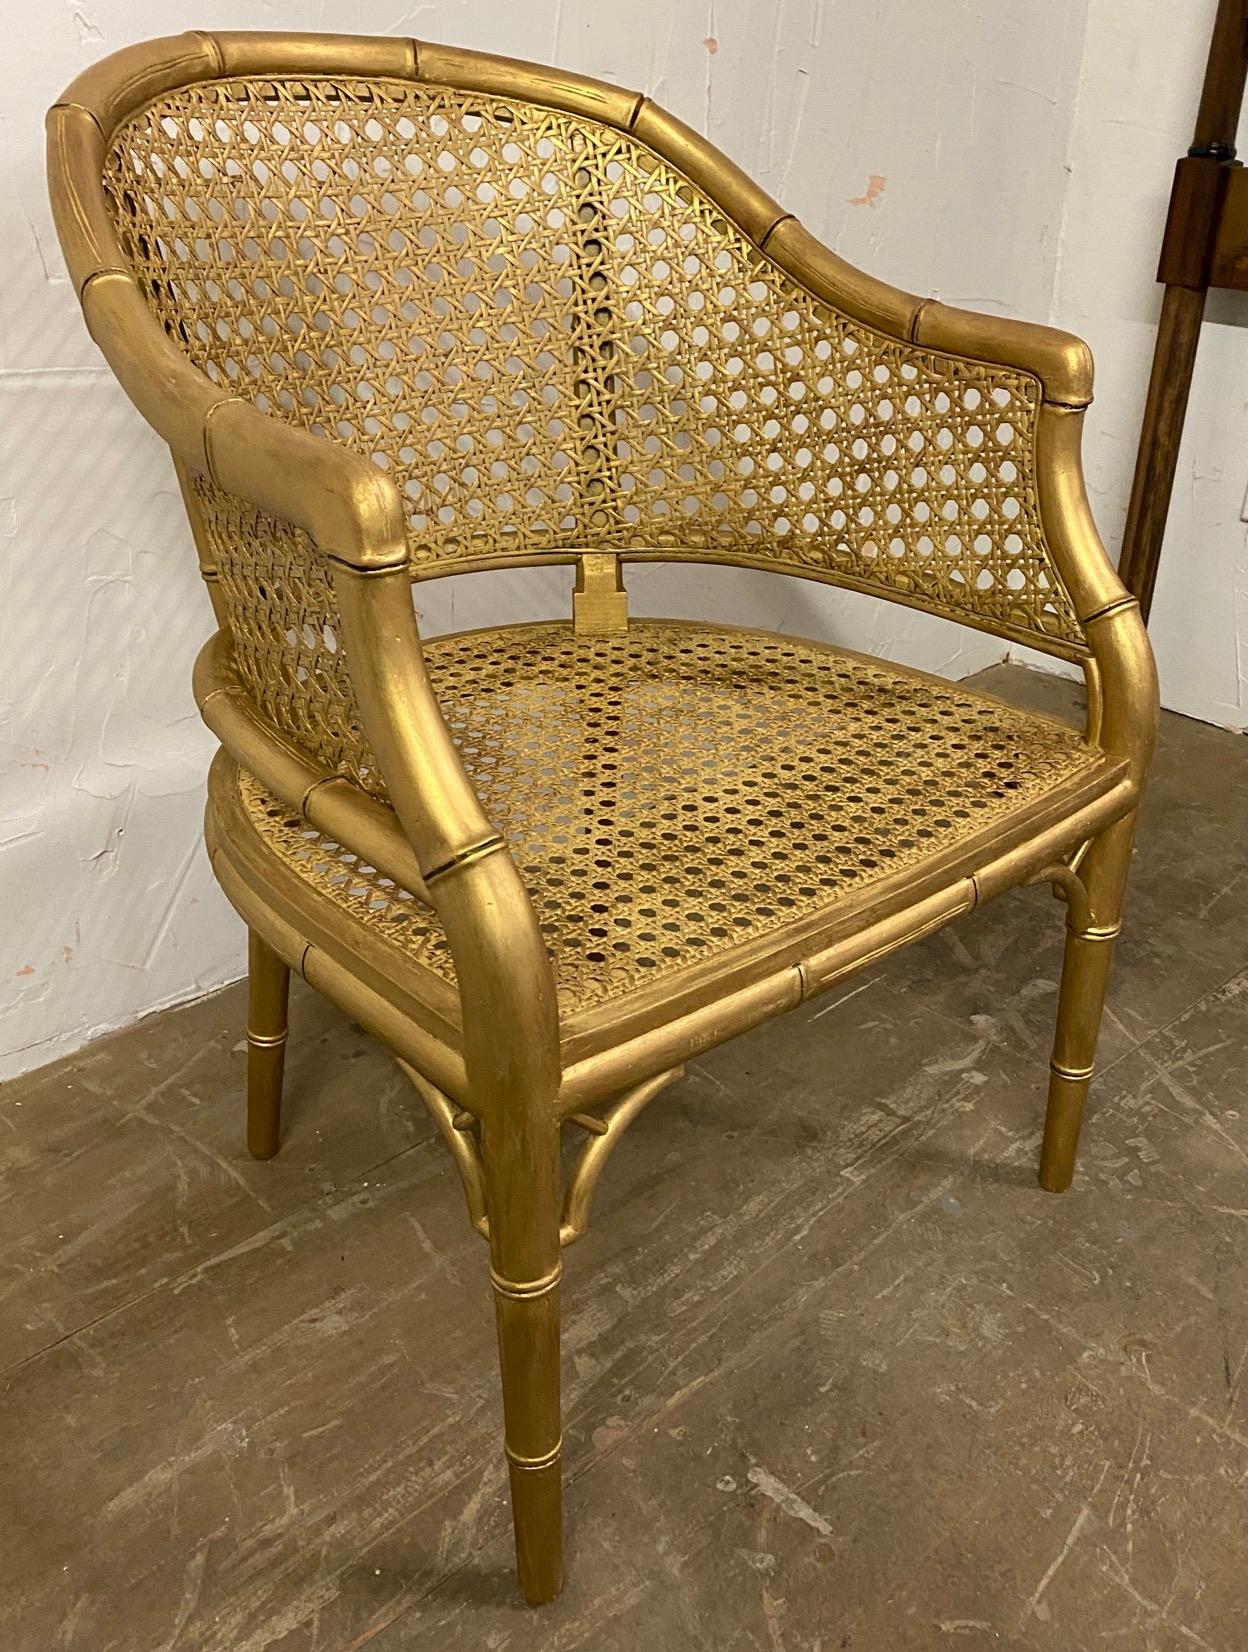 The very stylish Chinese Chippendale style faux bamboo barrel back armchair has a woven caned back and seat and a rubbed gilt finish. A great pull-up chair for any room. 
Search terms: Hollywood regency, Chinoiserie.

Measures: Arm H 26